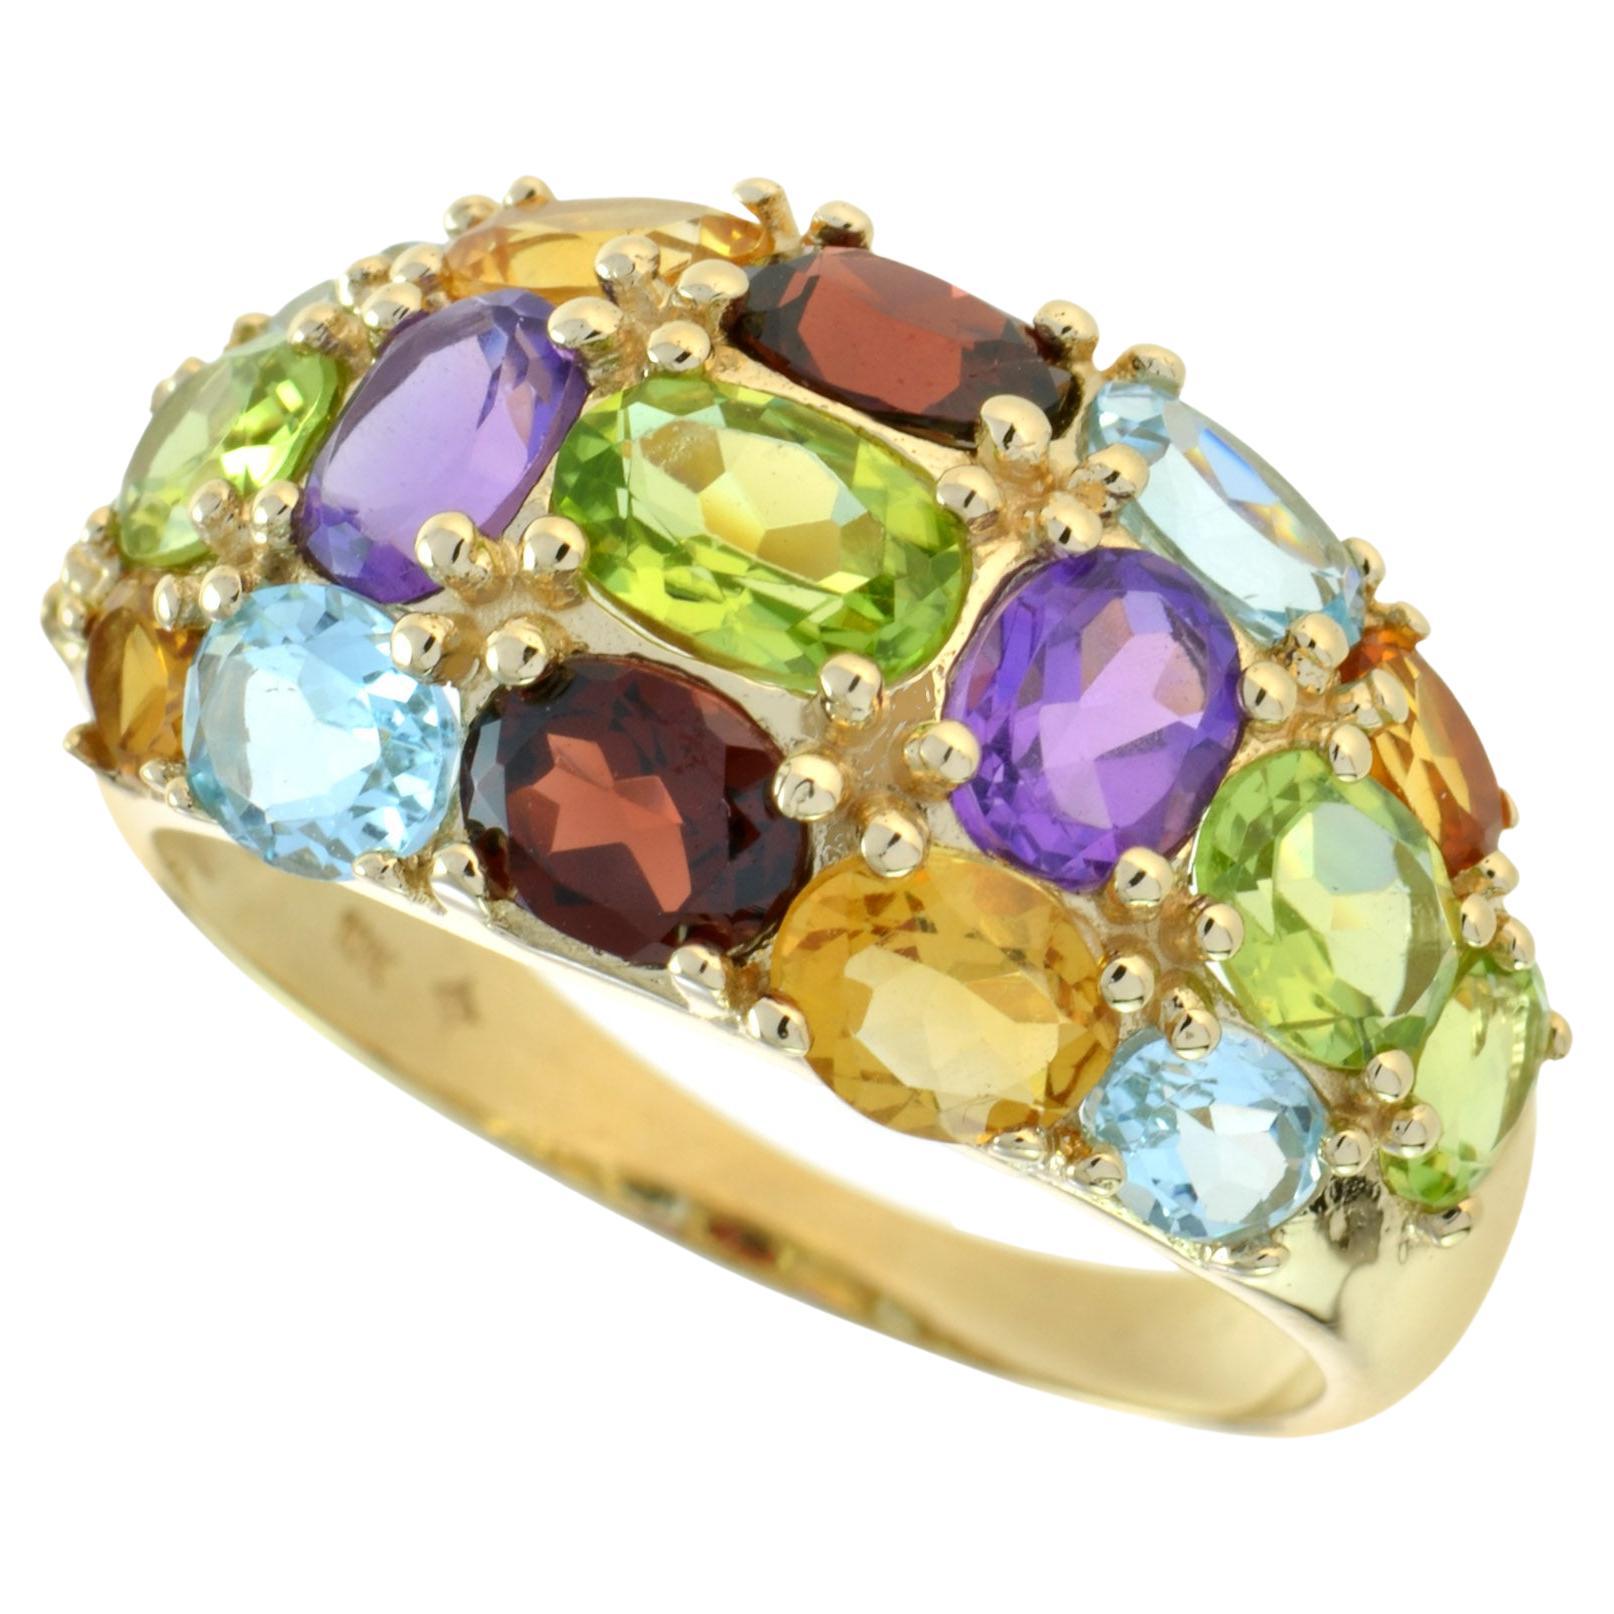 Vintage Style Multi Gemstone Cocktail Ring in 14K Yellow Gold